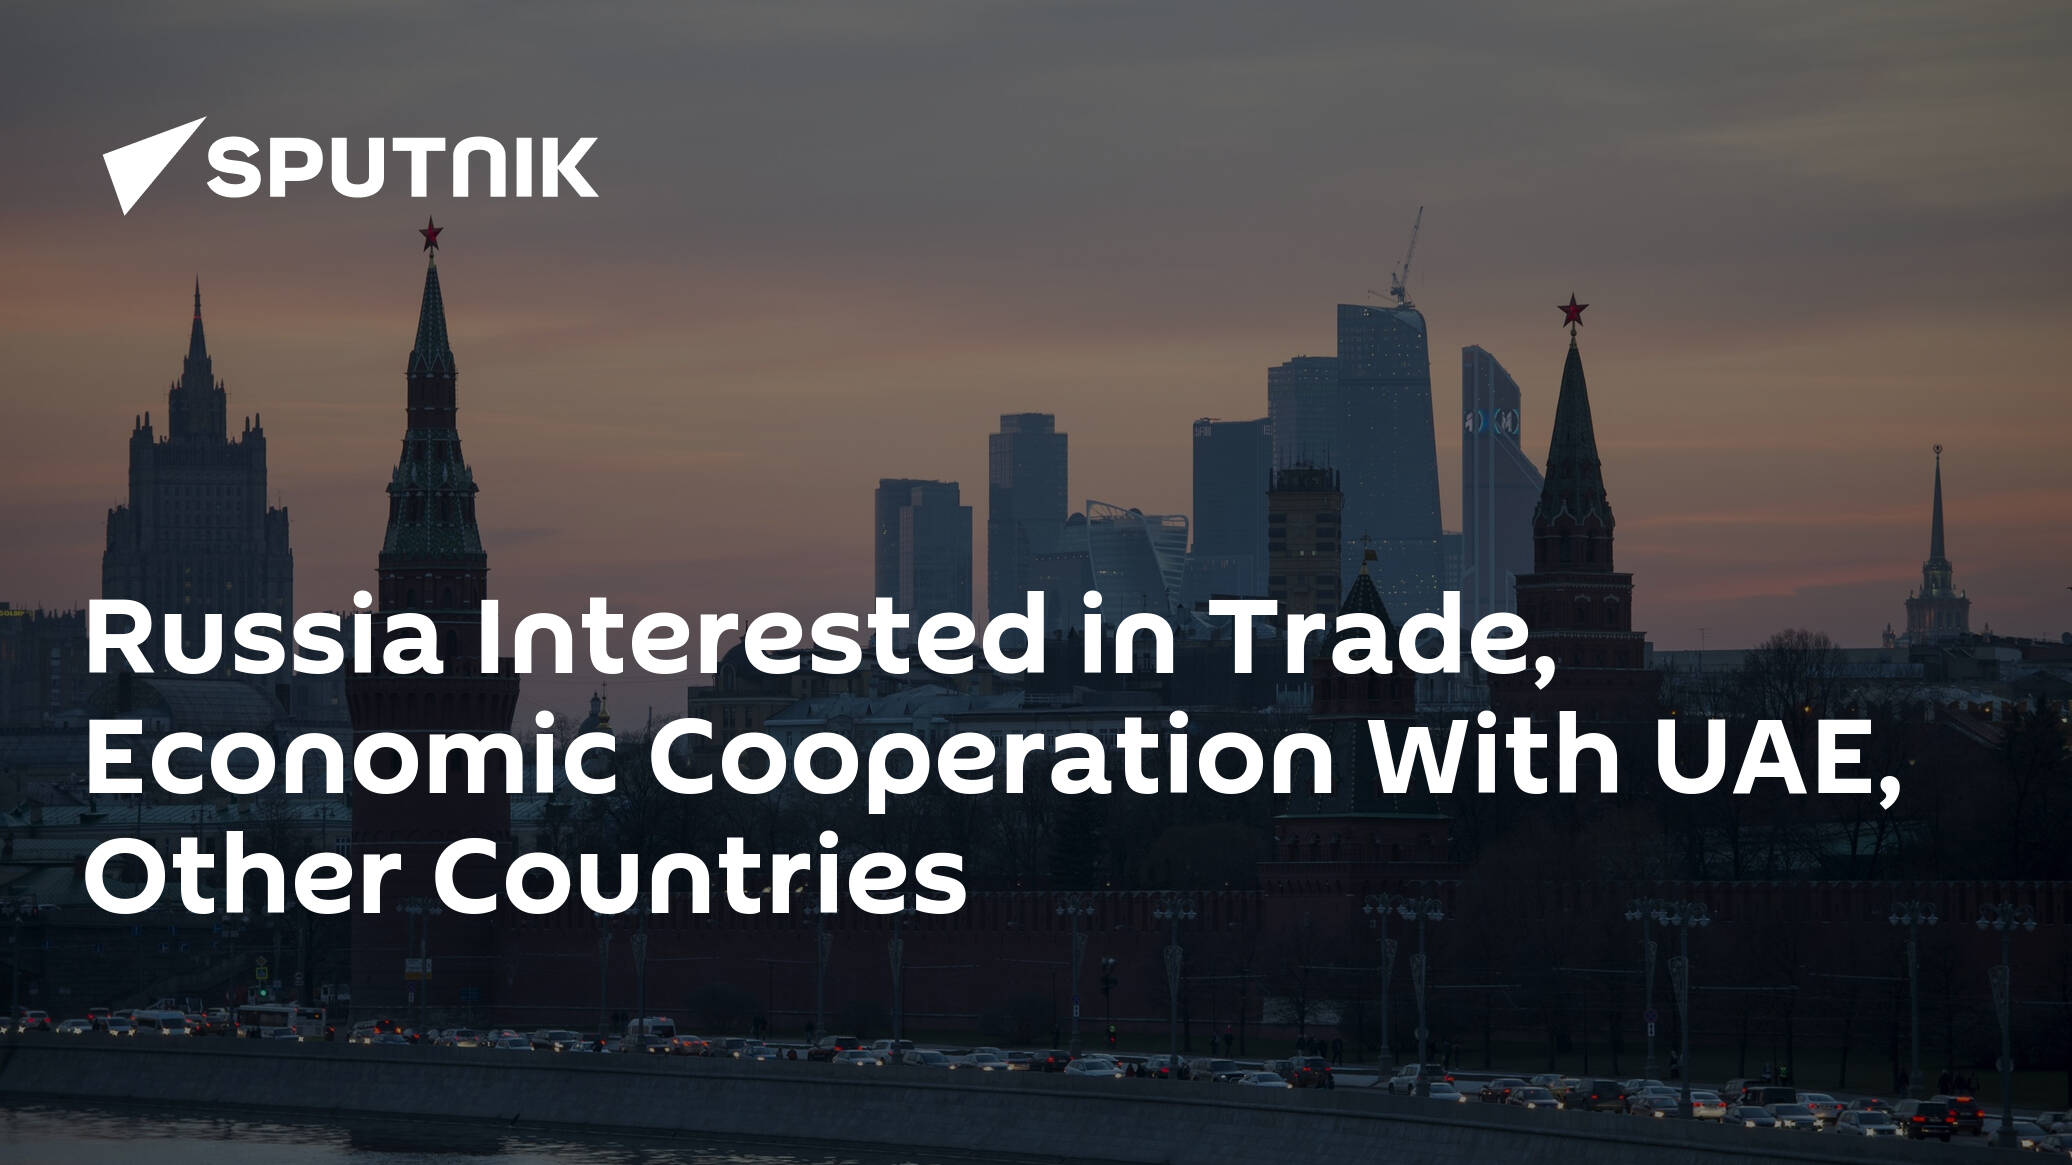 Russia Interested in Trade, Economic Cooperation With UAE, Other Countries